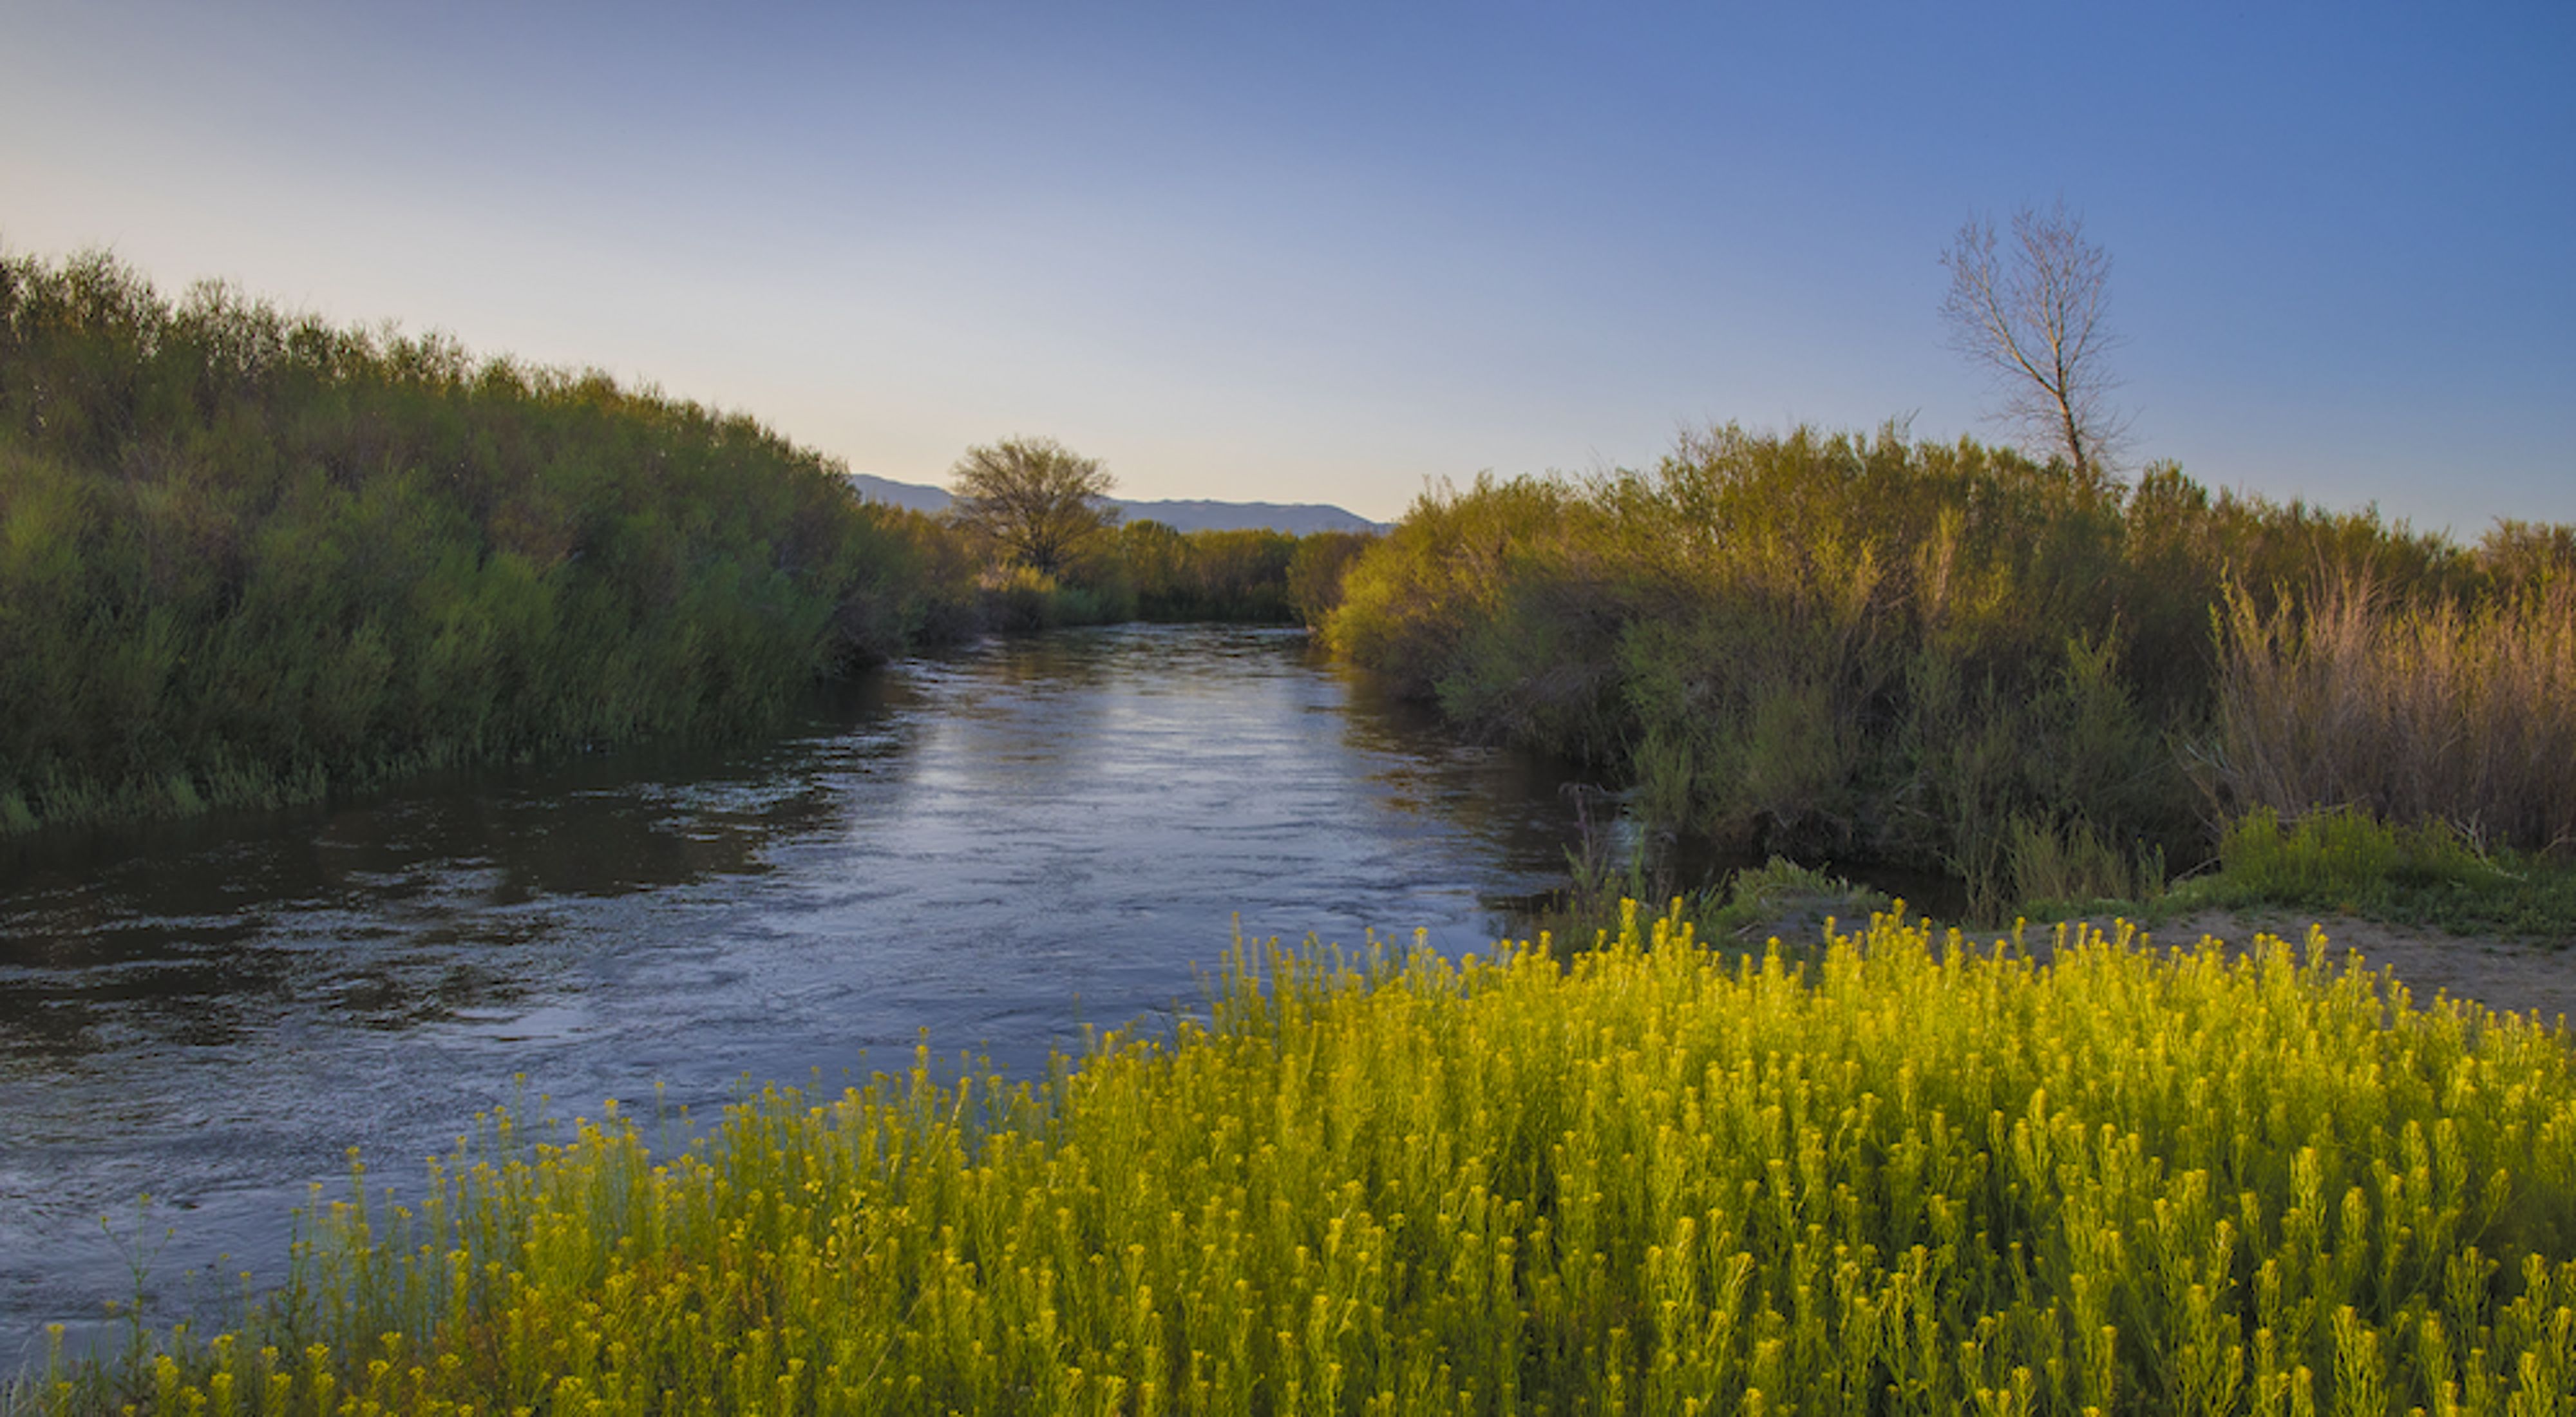 View of yellow flowers in front of a flowing river with mountains in the background. 